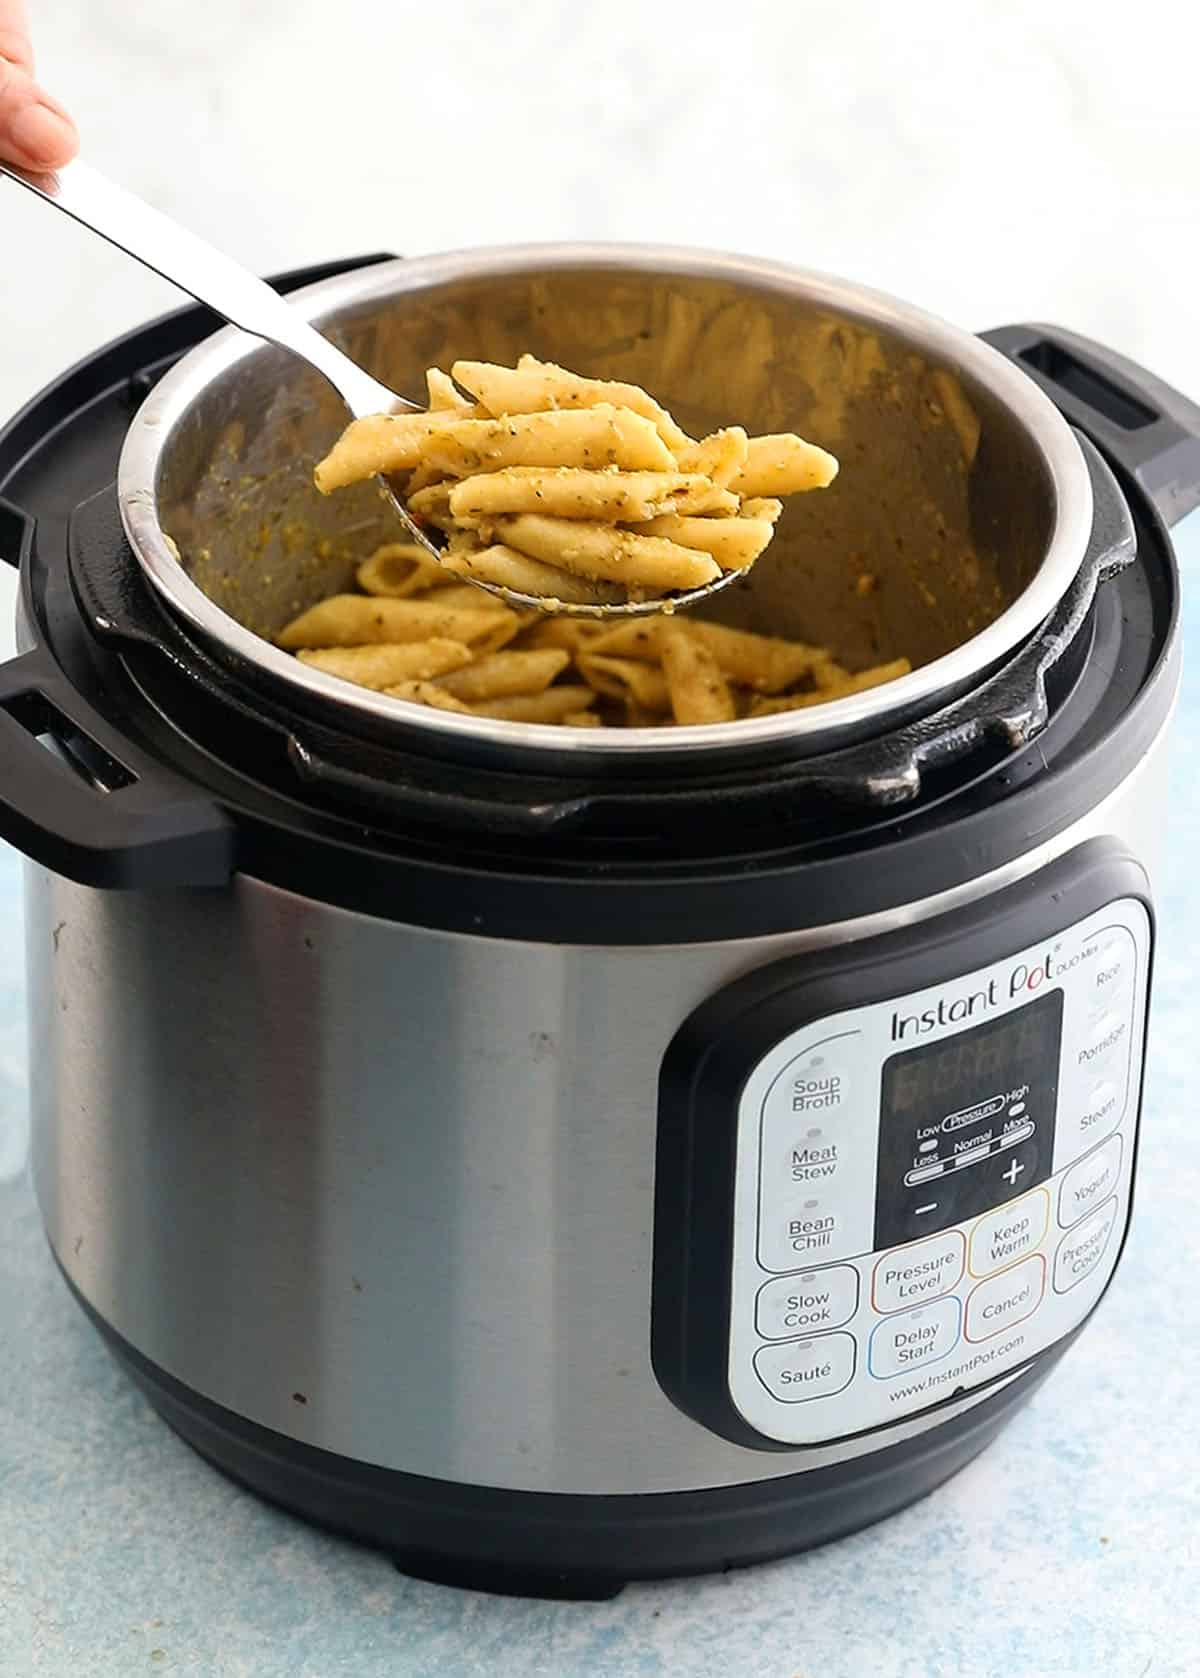 a hand lifting a ladle full of cooked penne pasta from an instant pot.